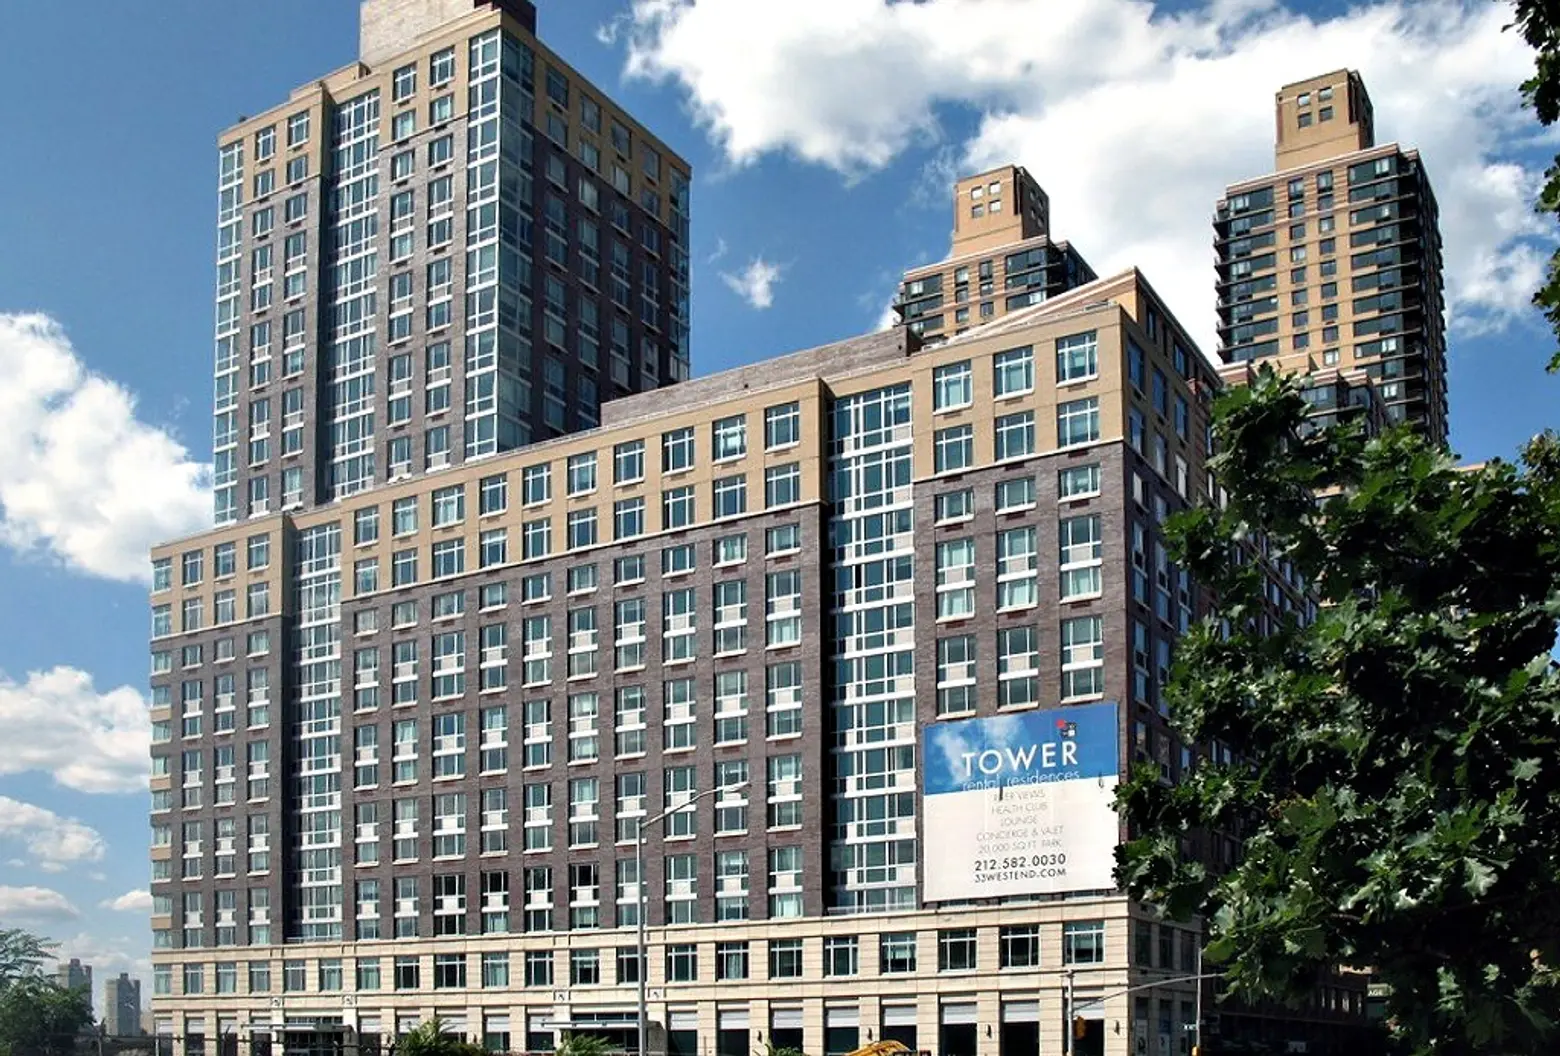 Enter the waitlist for middle-income apartments near Lincoln Center from $2,300/month